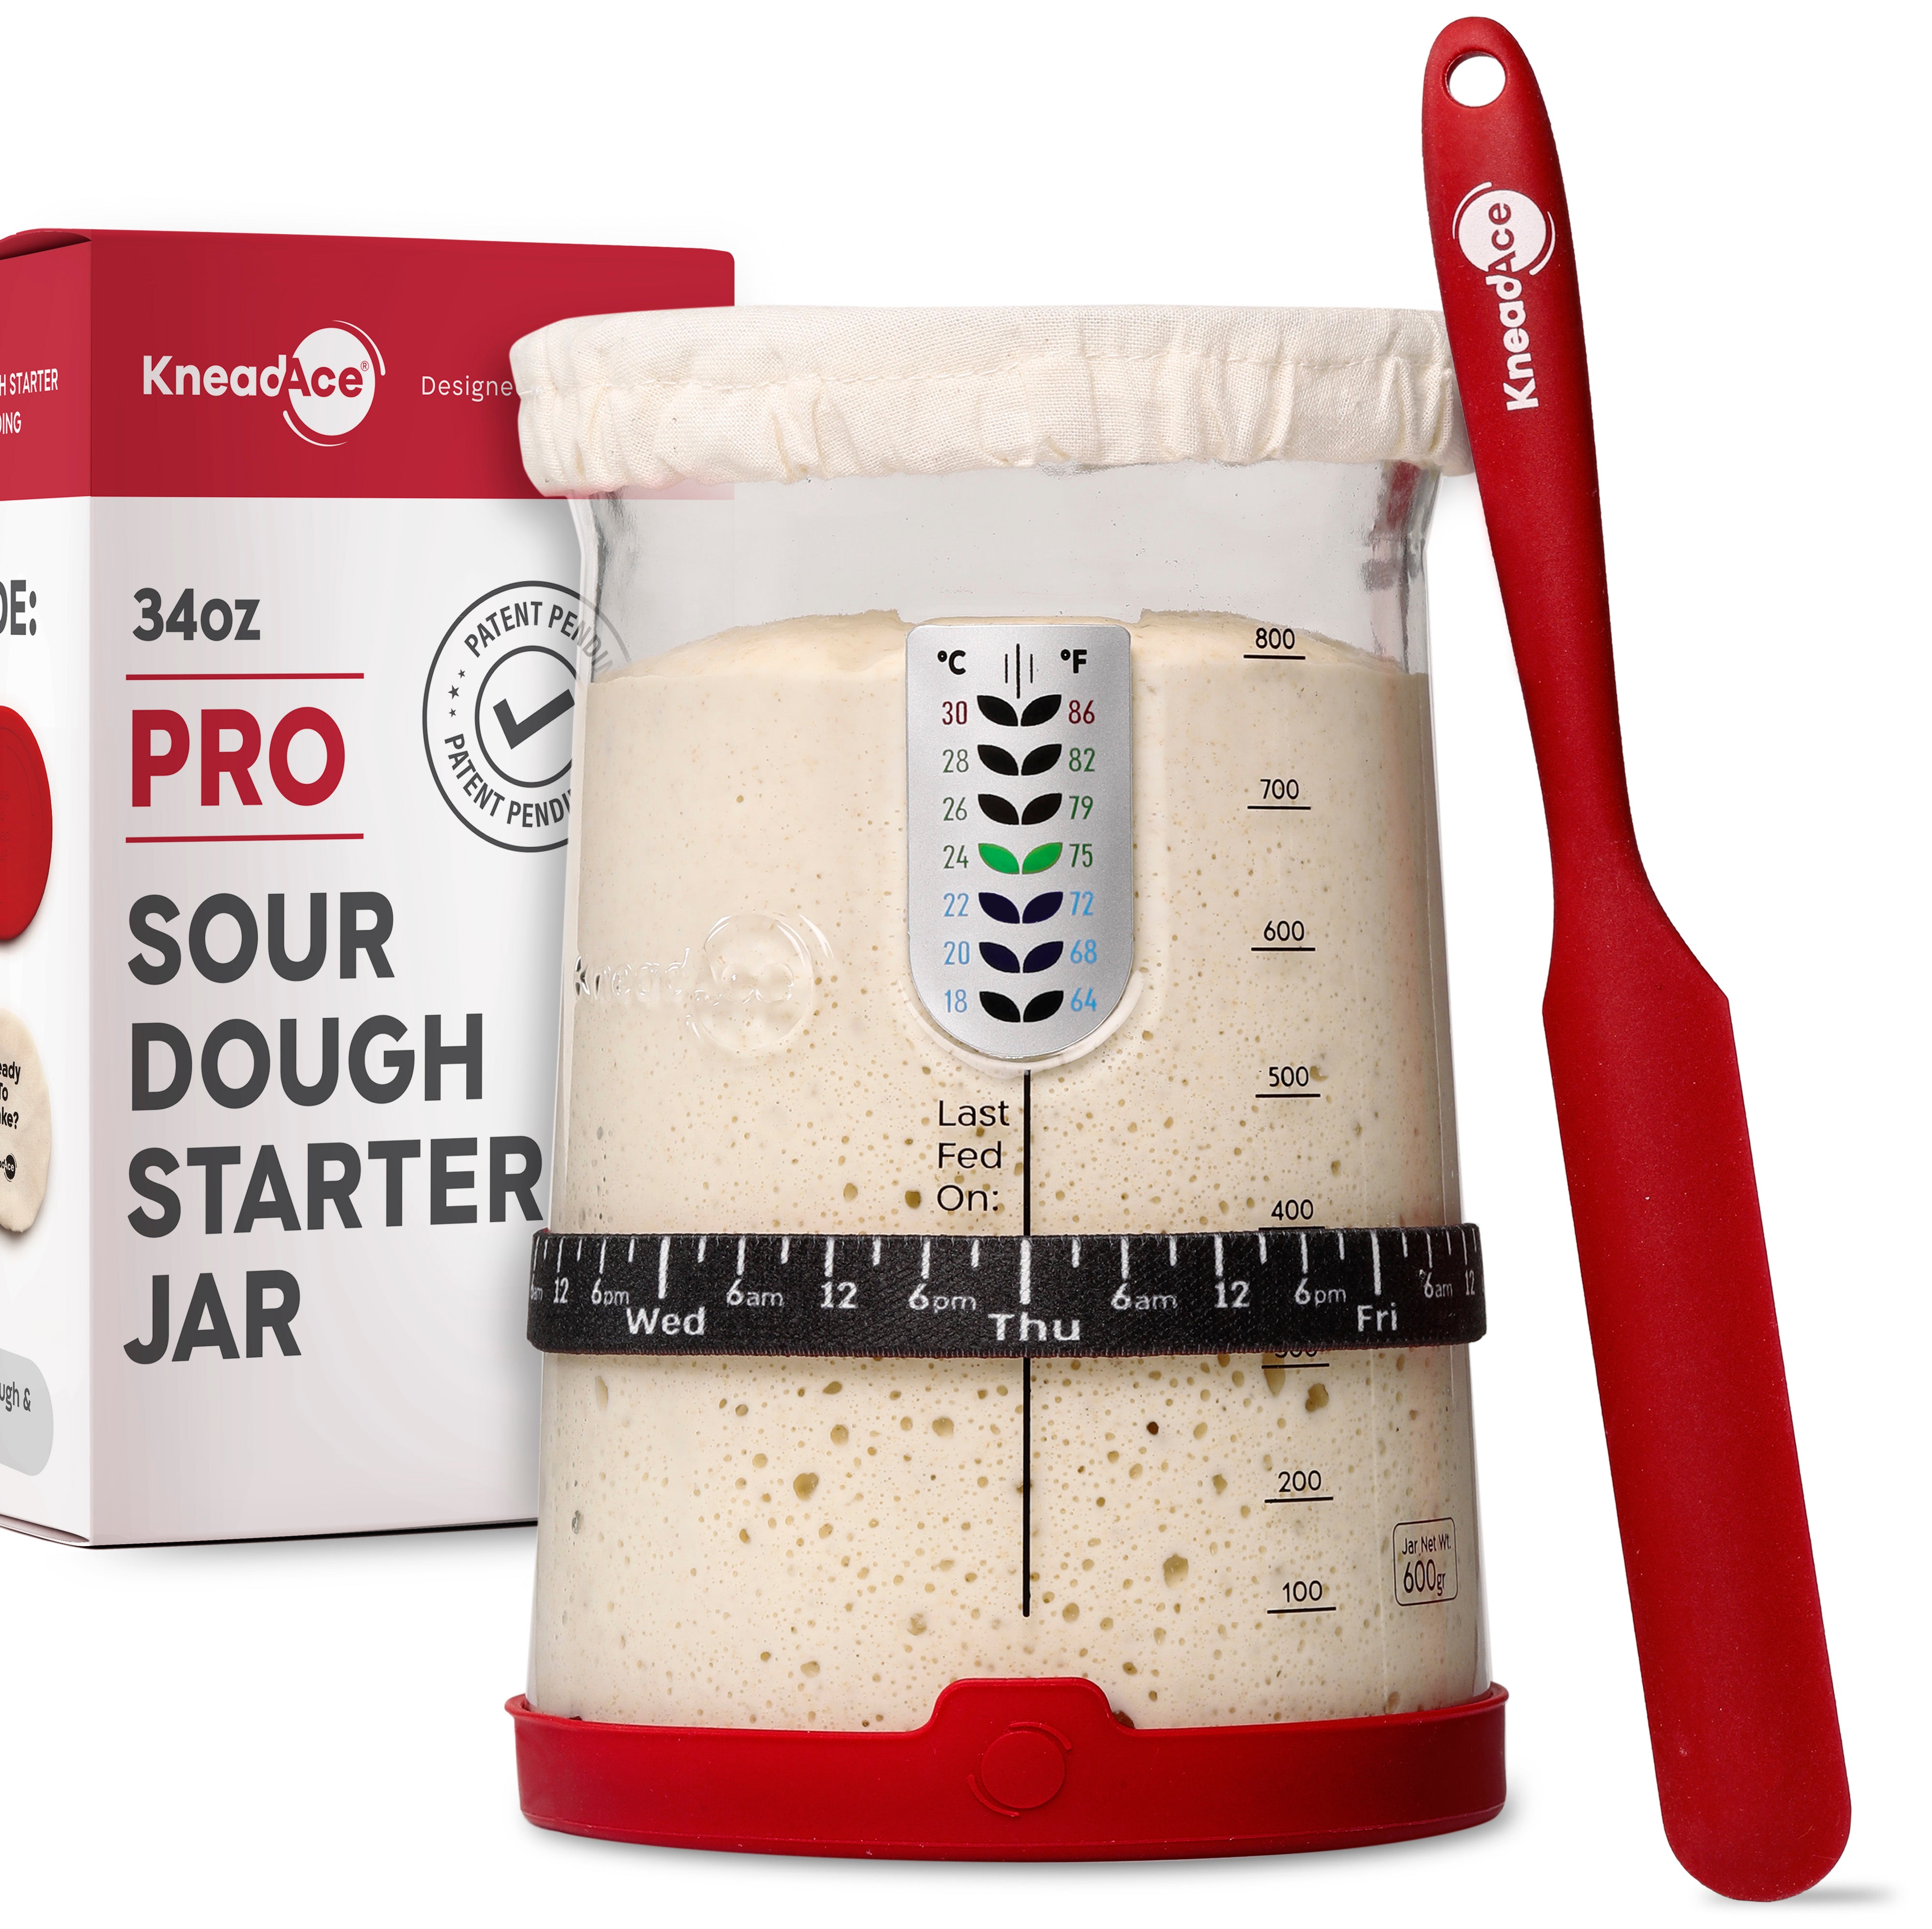 Essential Sourdough Starter Jar Kit (34 oz.) - Sourdough Jar Wide Mouth with Black Silicone Spatula, Elastic Tracking Band, and Bamboo Lid